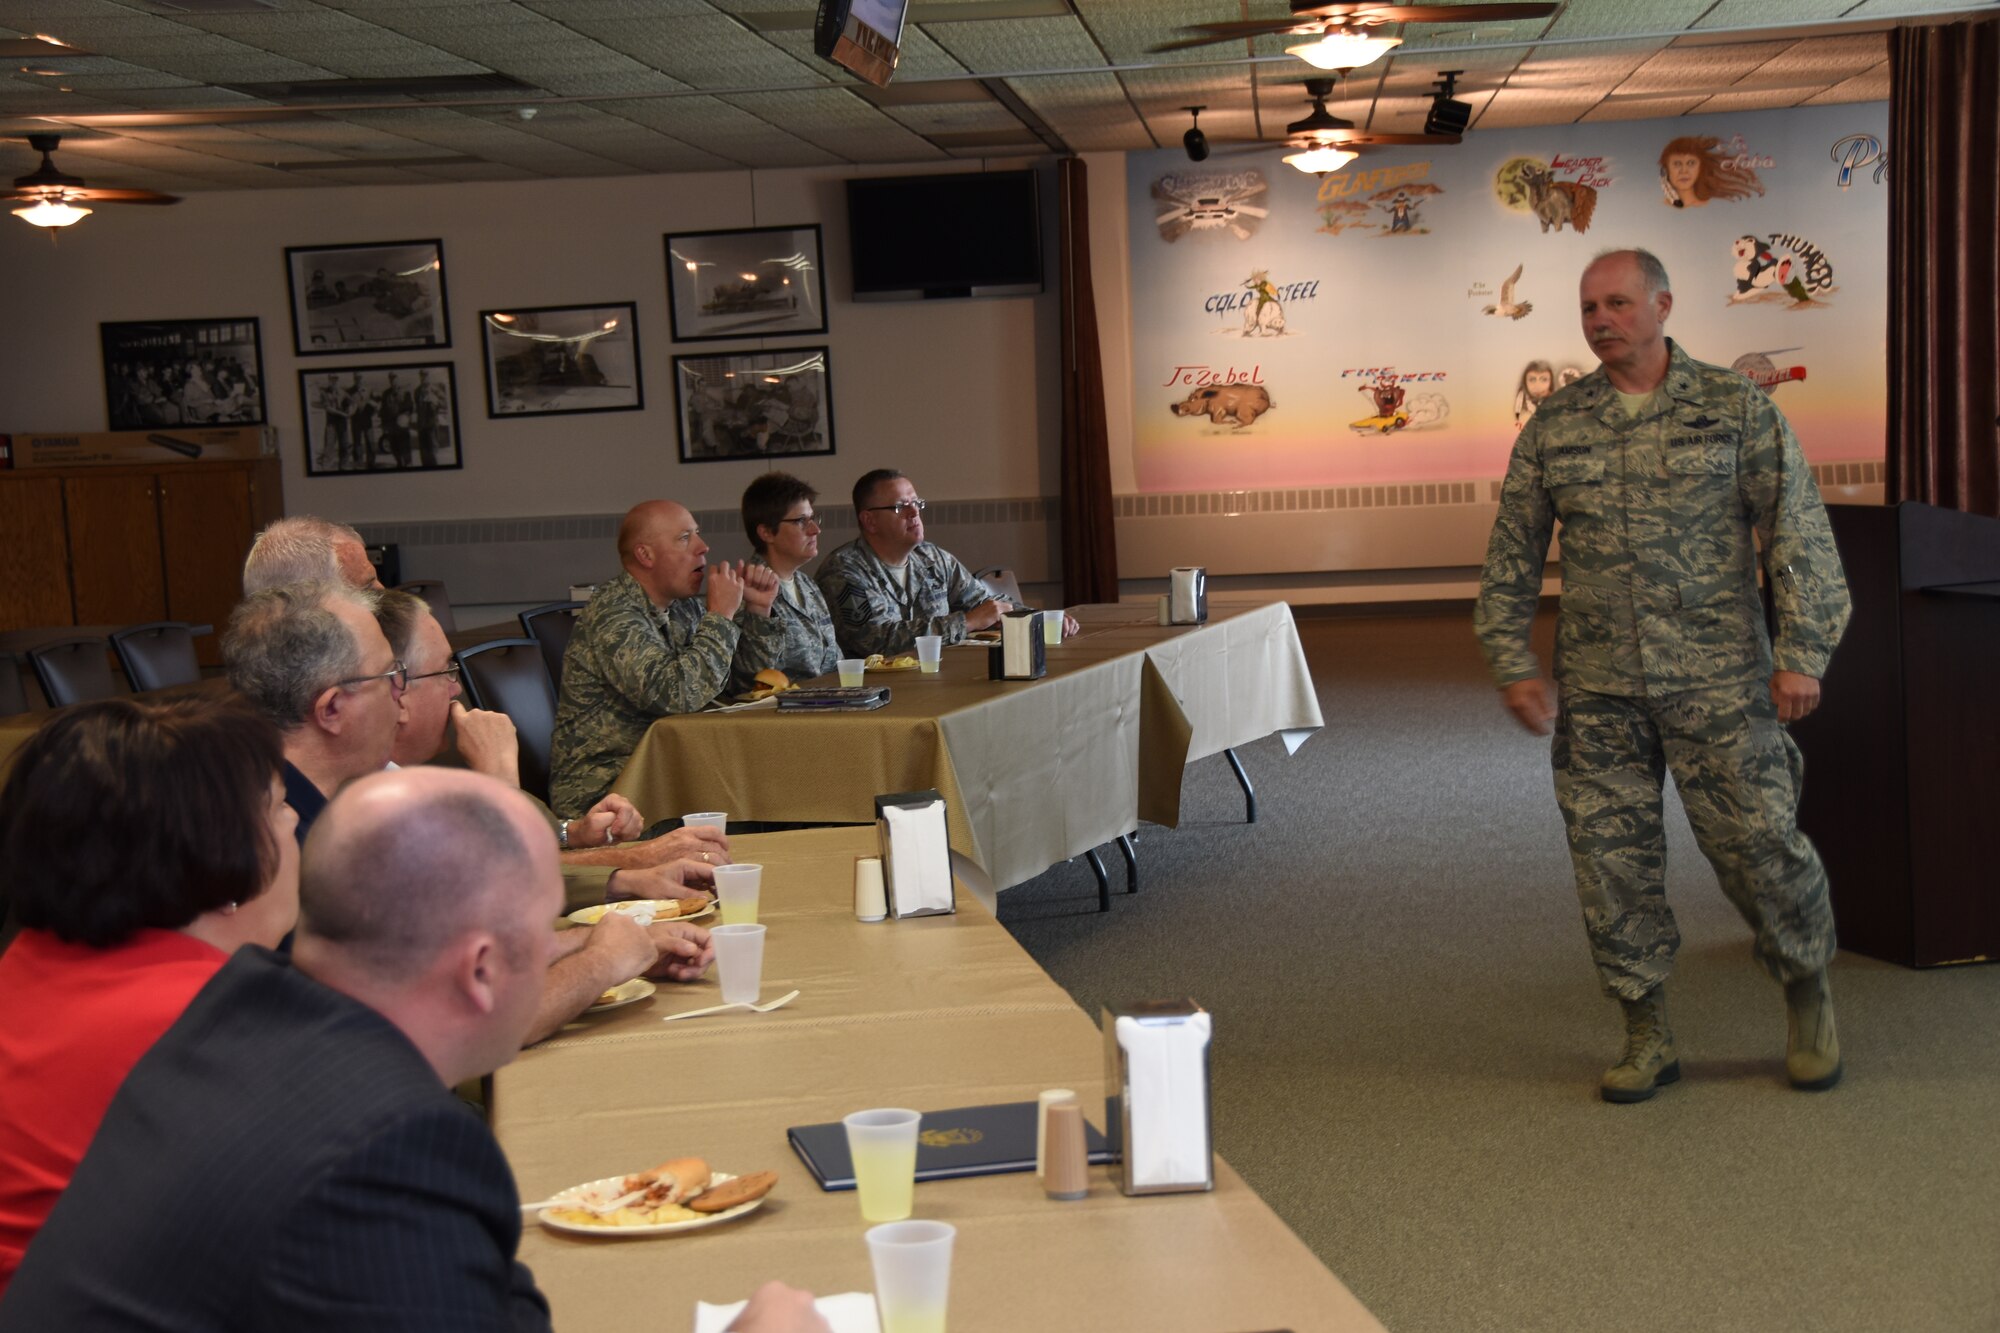 Brig. Gen. Matthew Jamison, South Dakota National Guard’s assistant adjutant general for air, briefs members and guests of the Air Force Association about the future of the 114th Fighter Wing at Joe Foss Field, S.D., June 25, 2015. Air Combat Command’s goal is to field the F-35 aircraft at locations now hosting fighters and in squadron sizes closely matching those of the legacy units to minimize the cost of conversion. (National Guard photo by Staff Sgt. Luke Olson/Released)